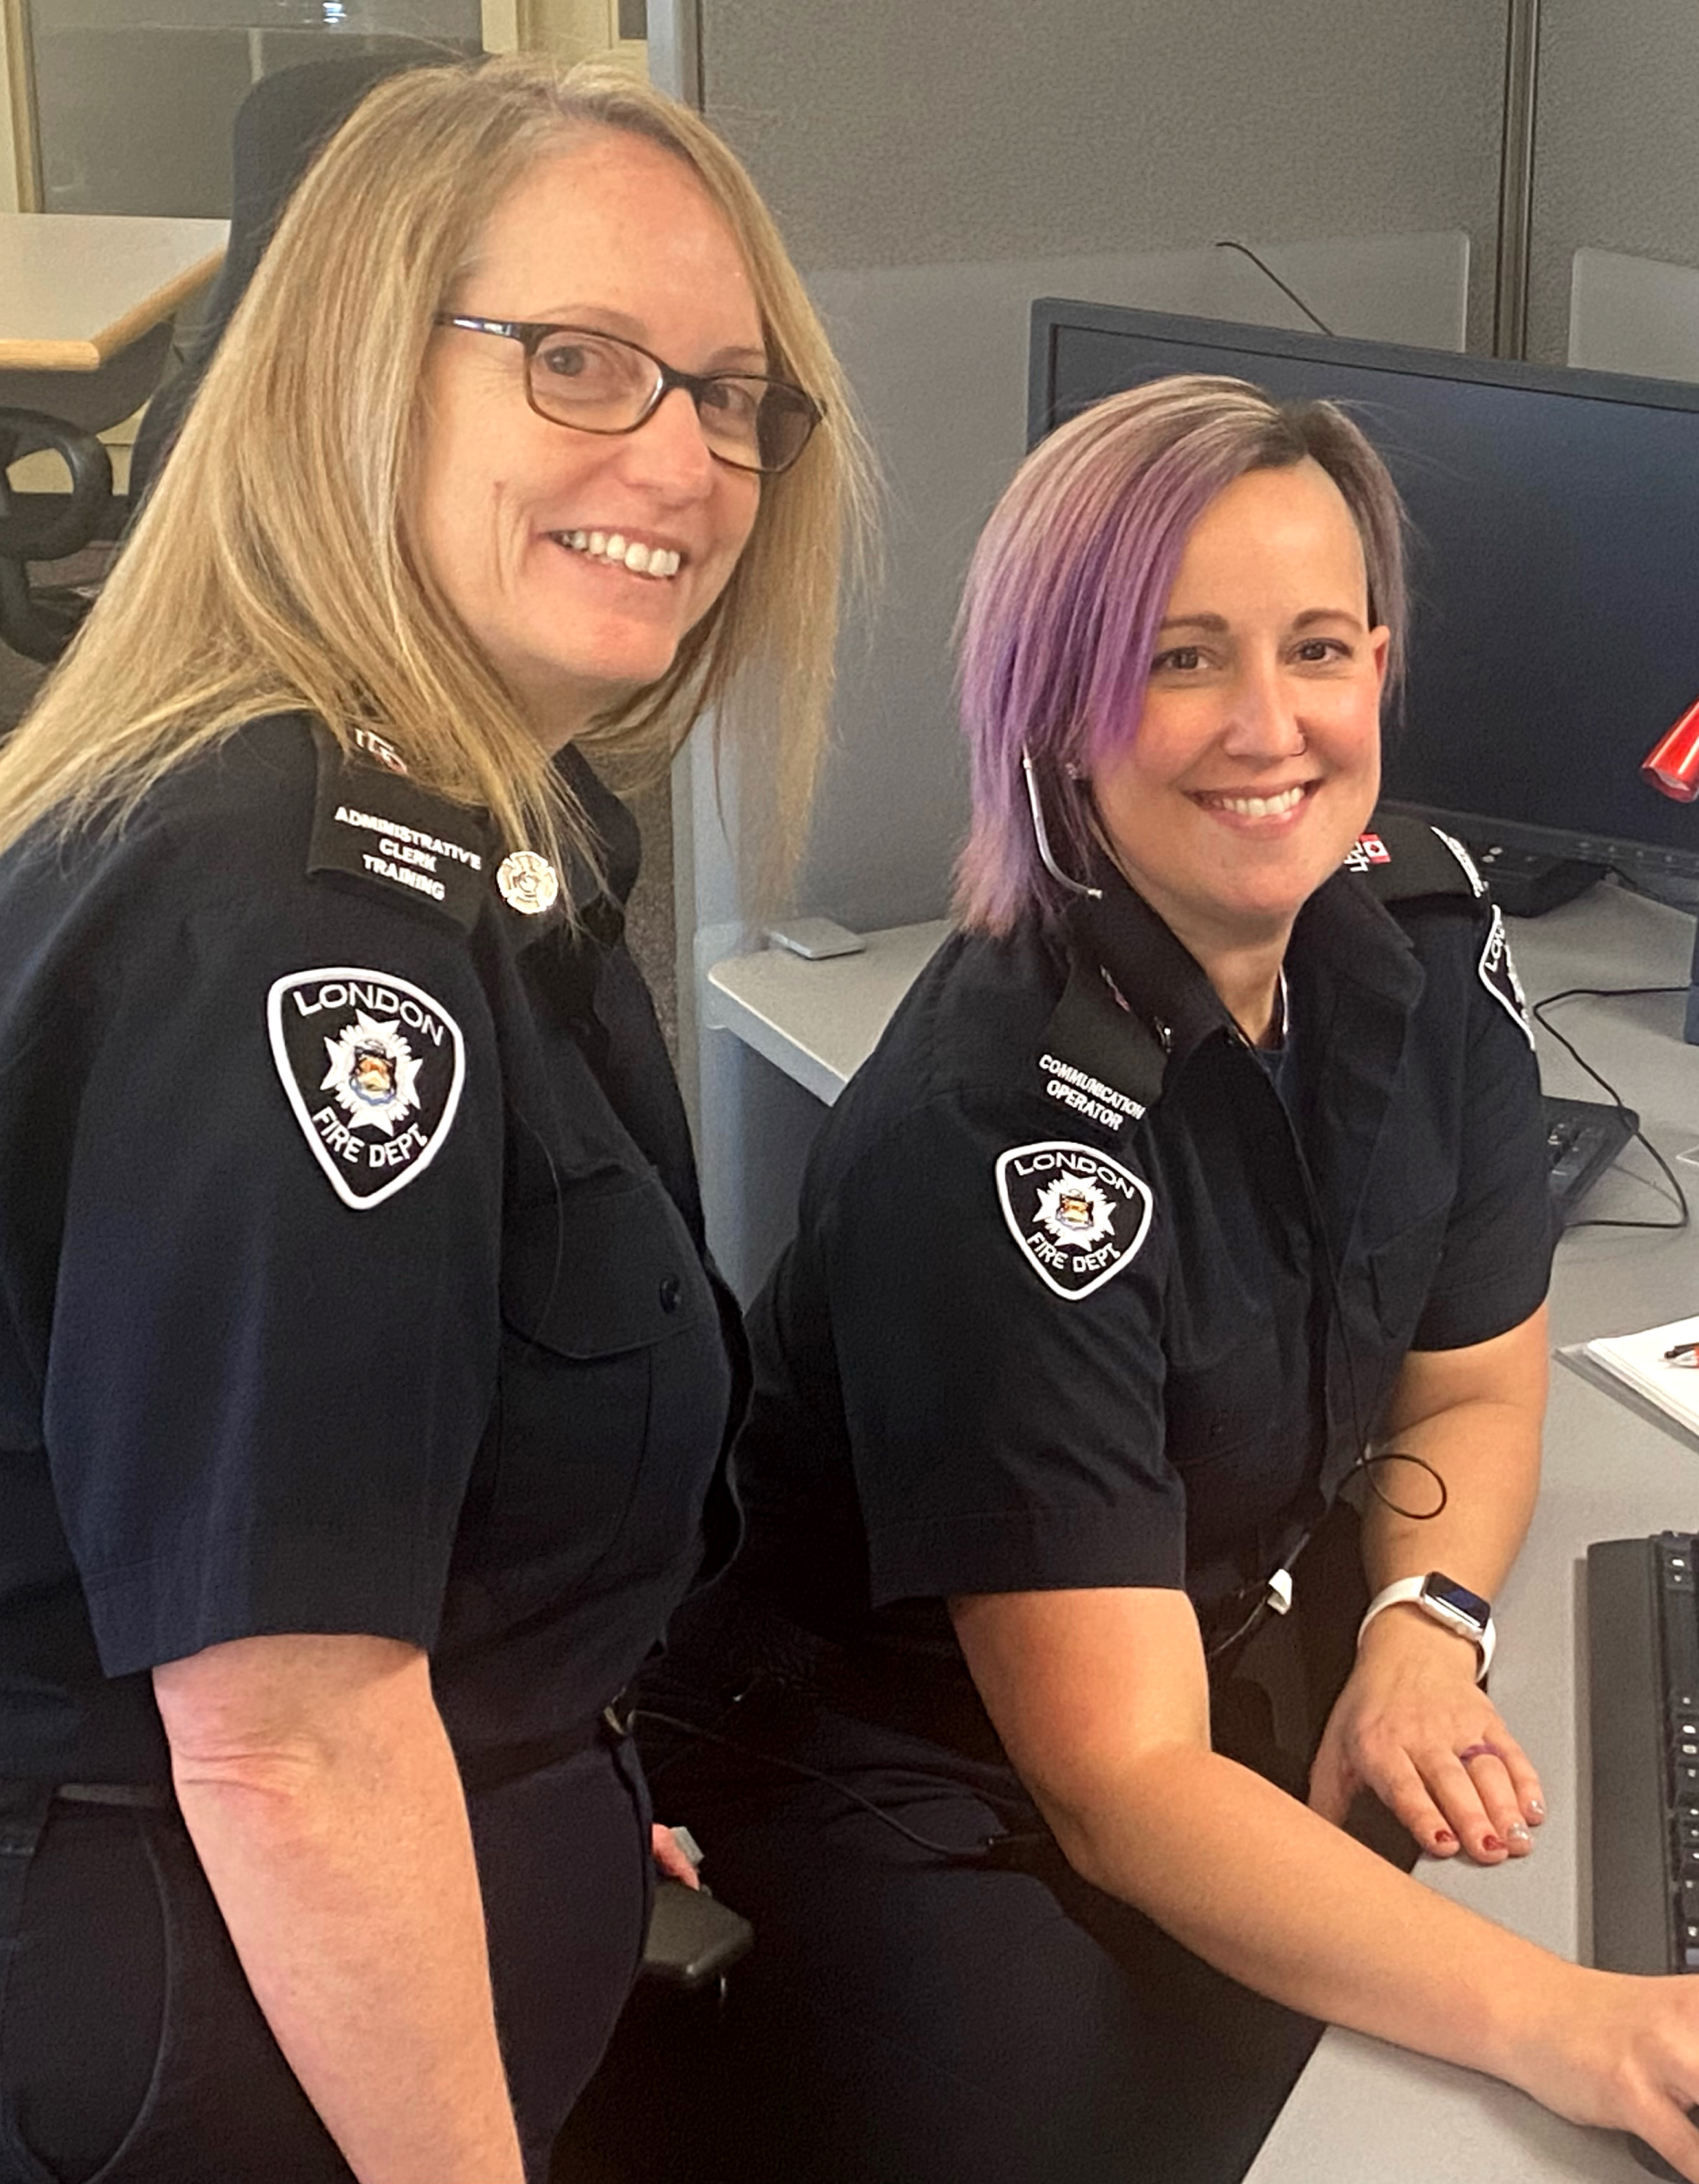 Two female firefighters at a desk smiling for the camera